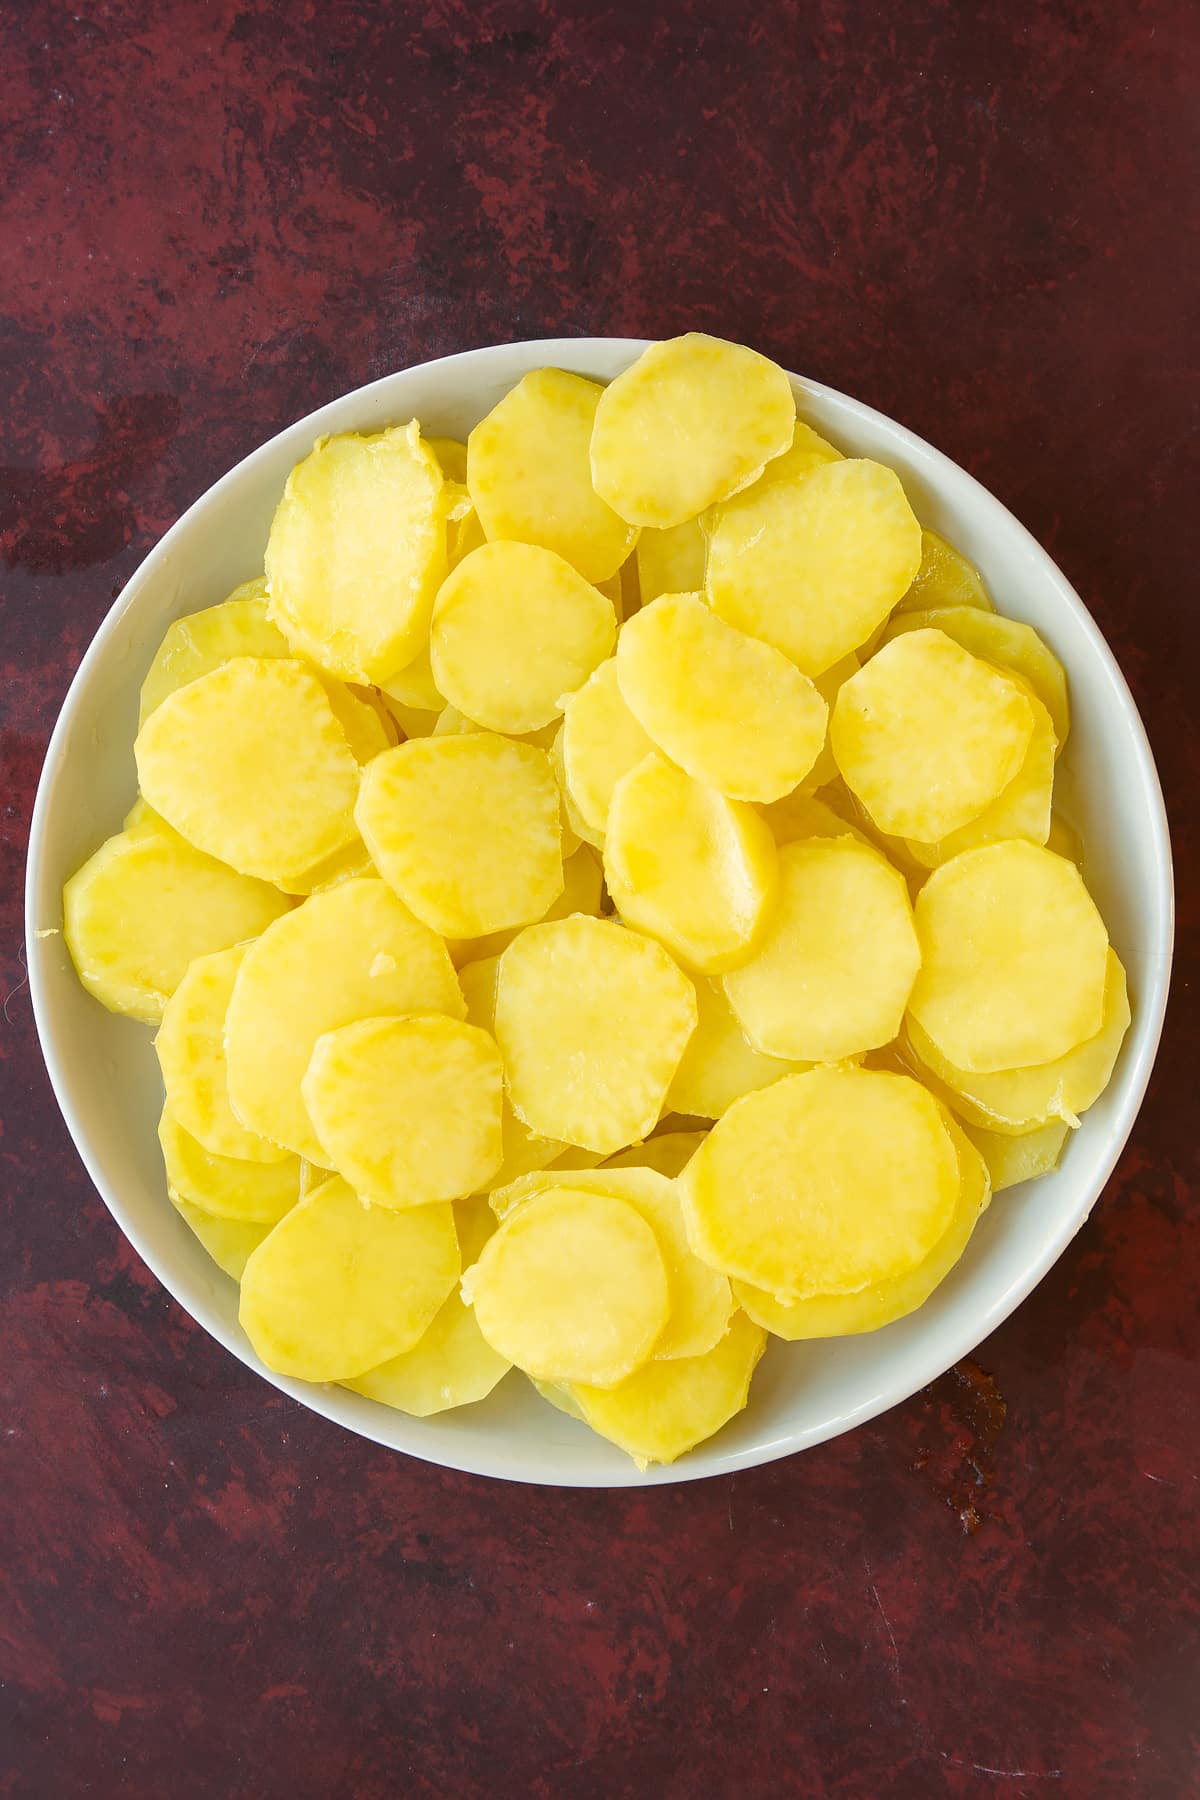 Overhead shot of the sliced potatoes in a white bowl.